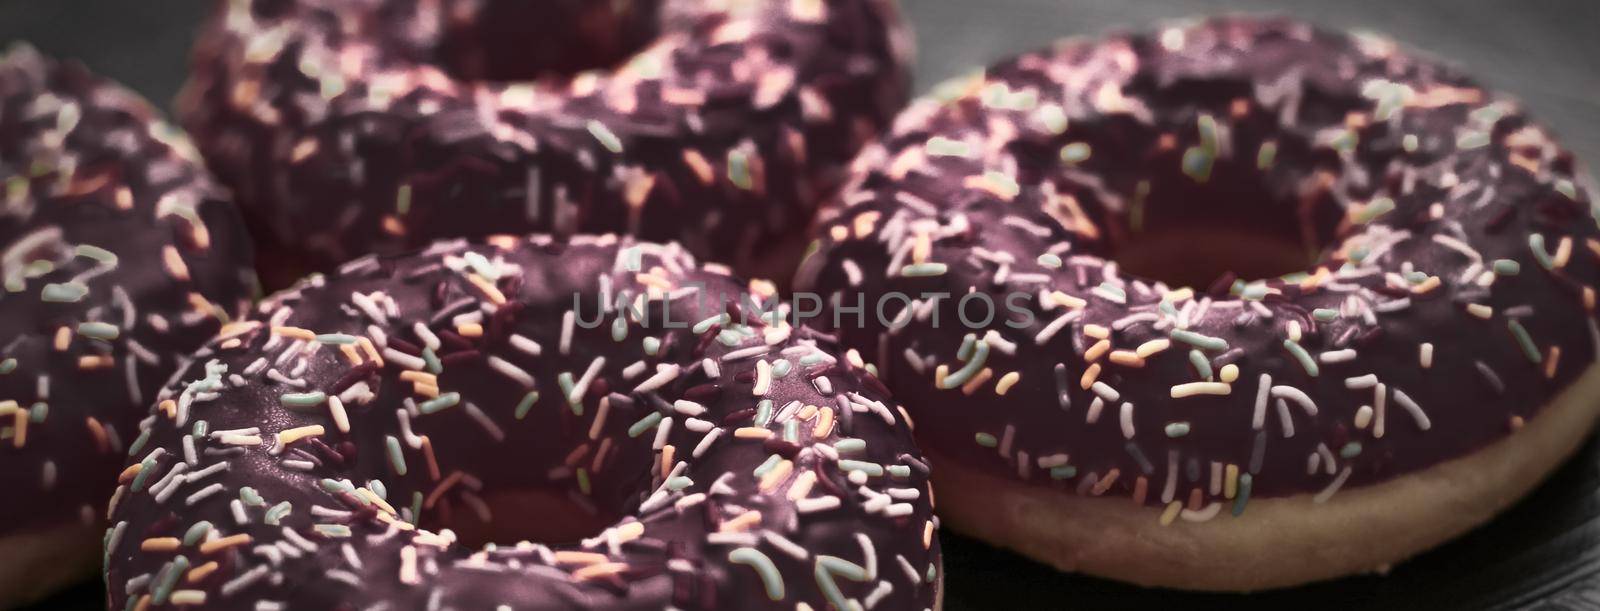 Frosted sprinkled donuts, sweet pastry dessert on rustic wooden background, doughnuts as tasty snack, top view food brand flat lay for blog, menu or cookbook design by Anneleven